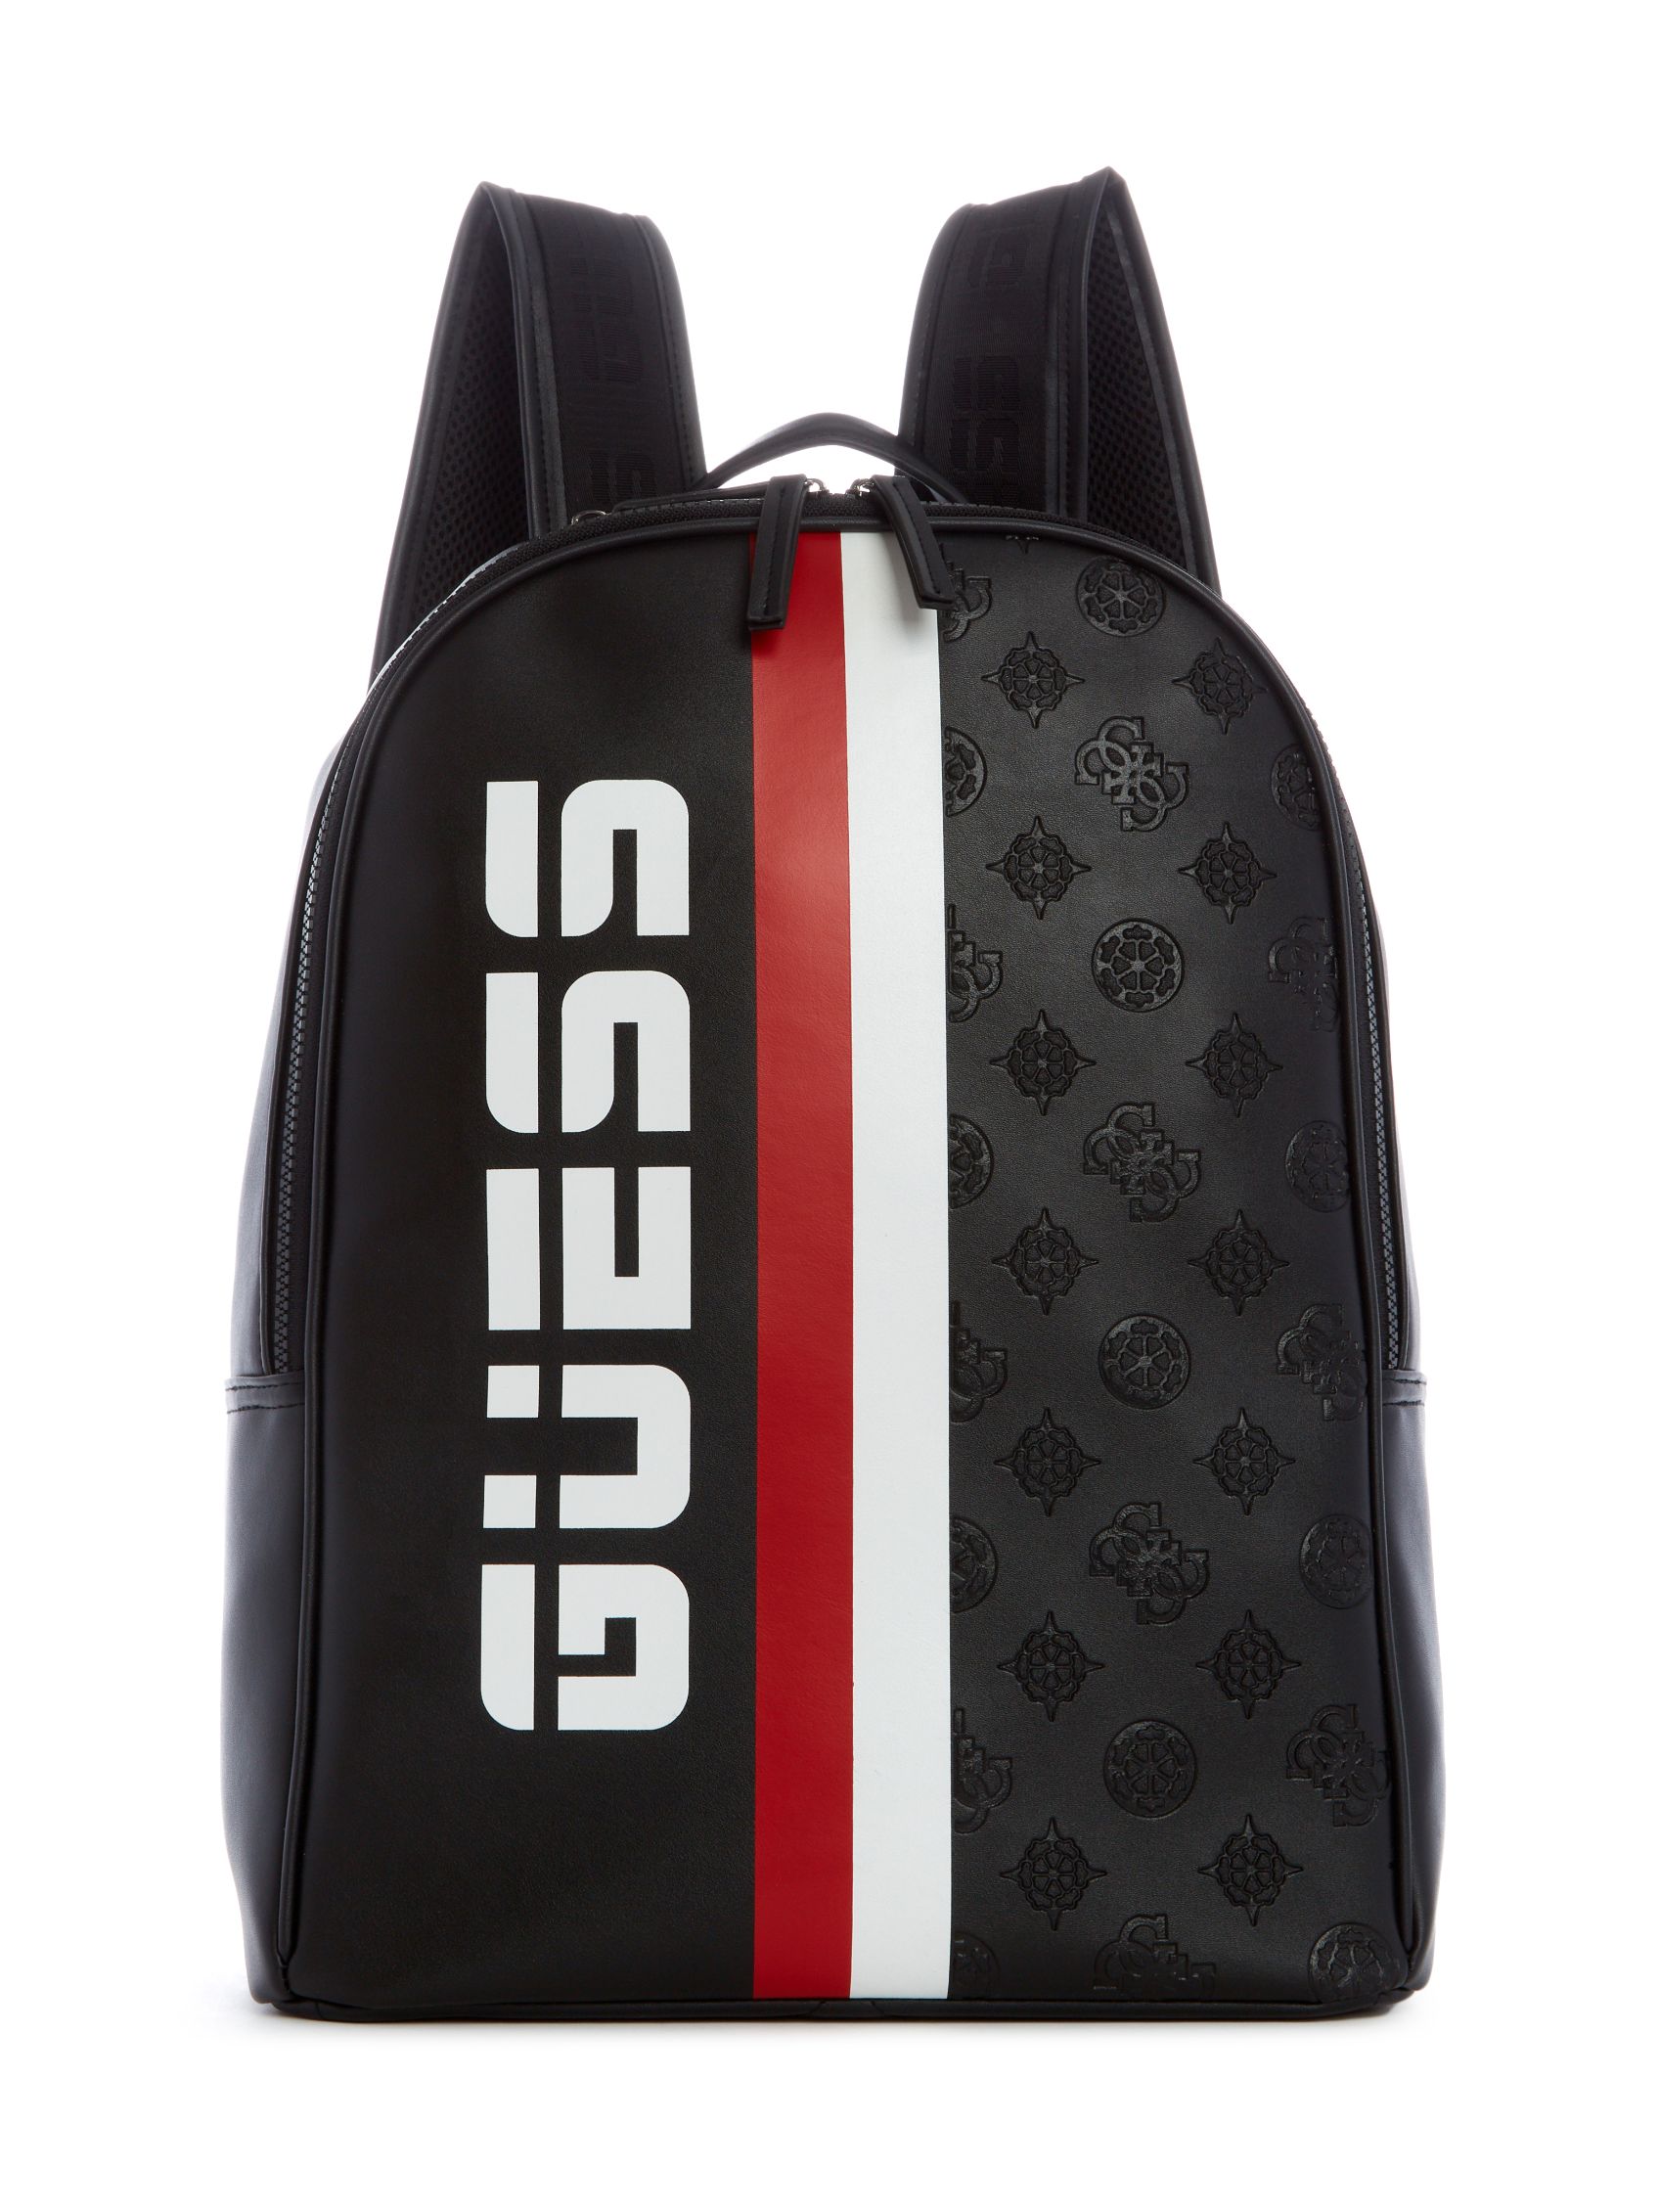 GUESS SPORT BACKPACK | Guess Philippines